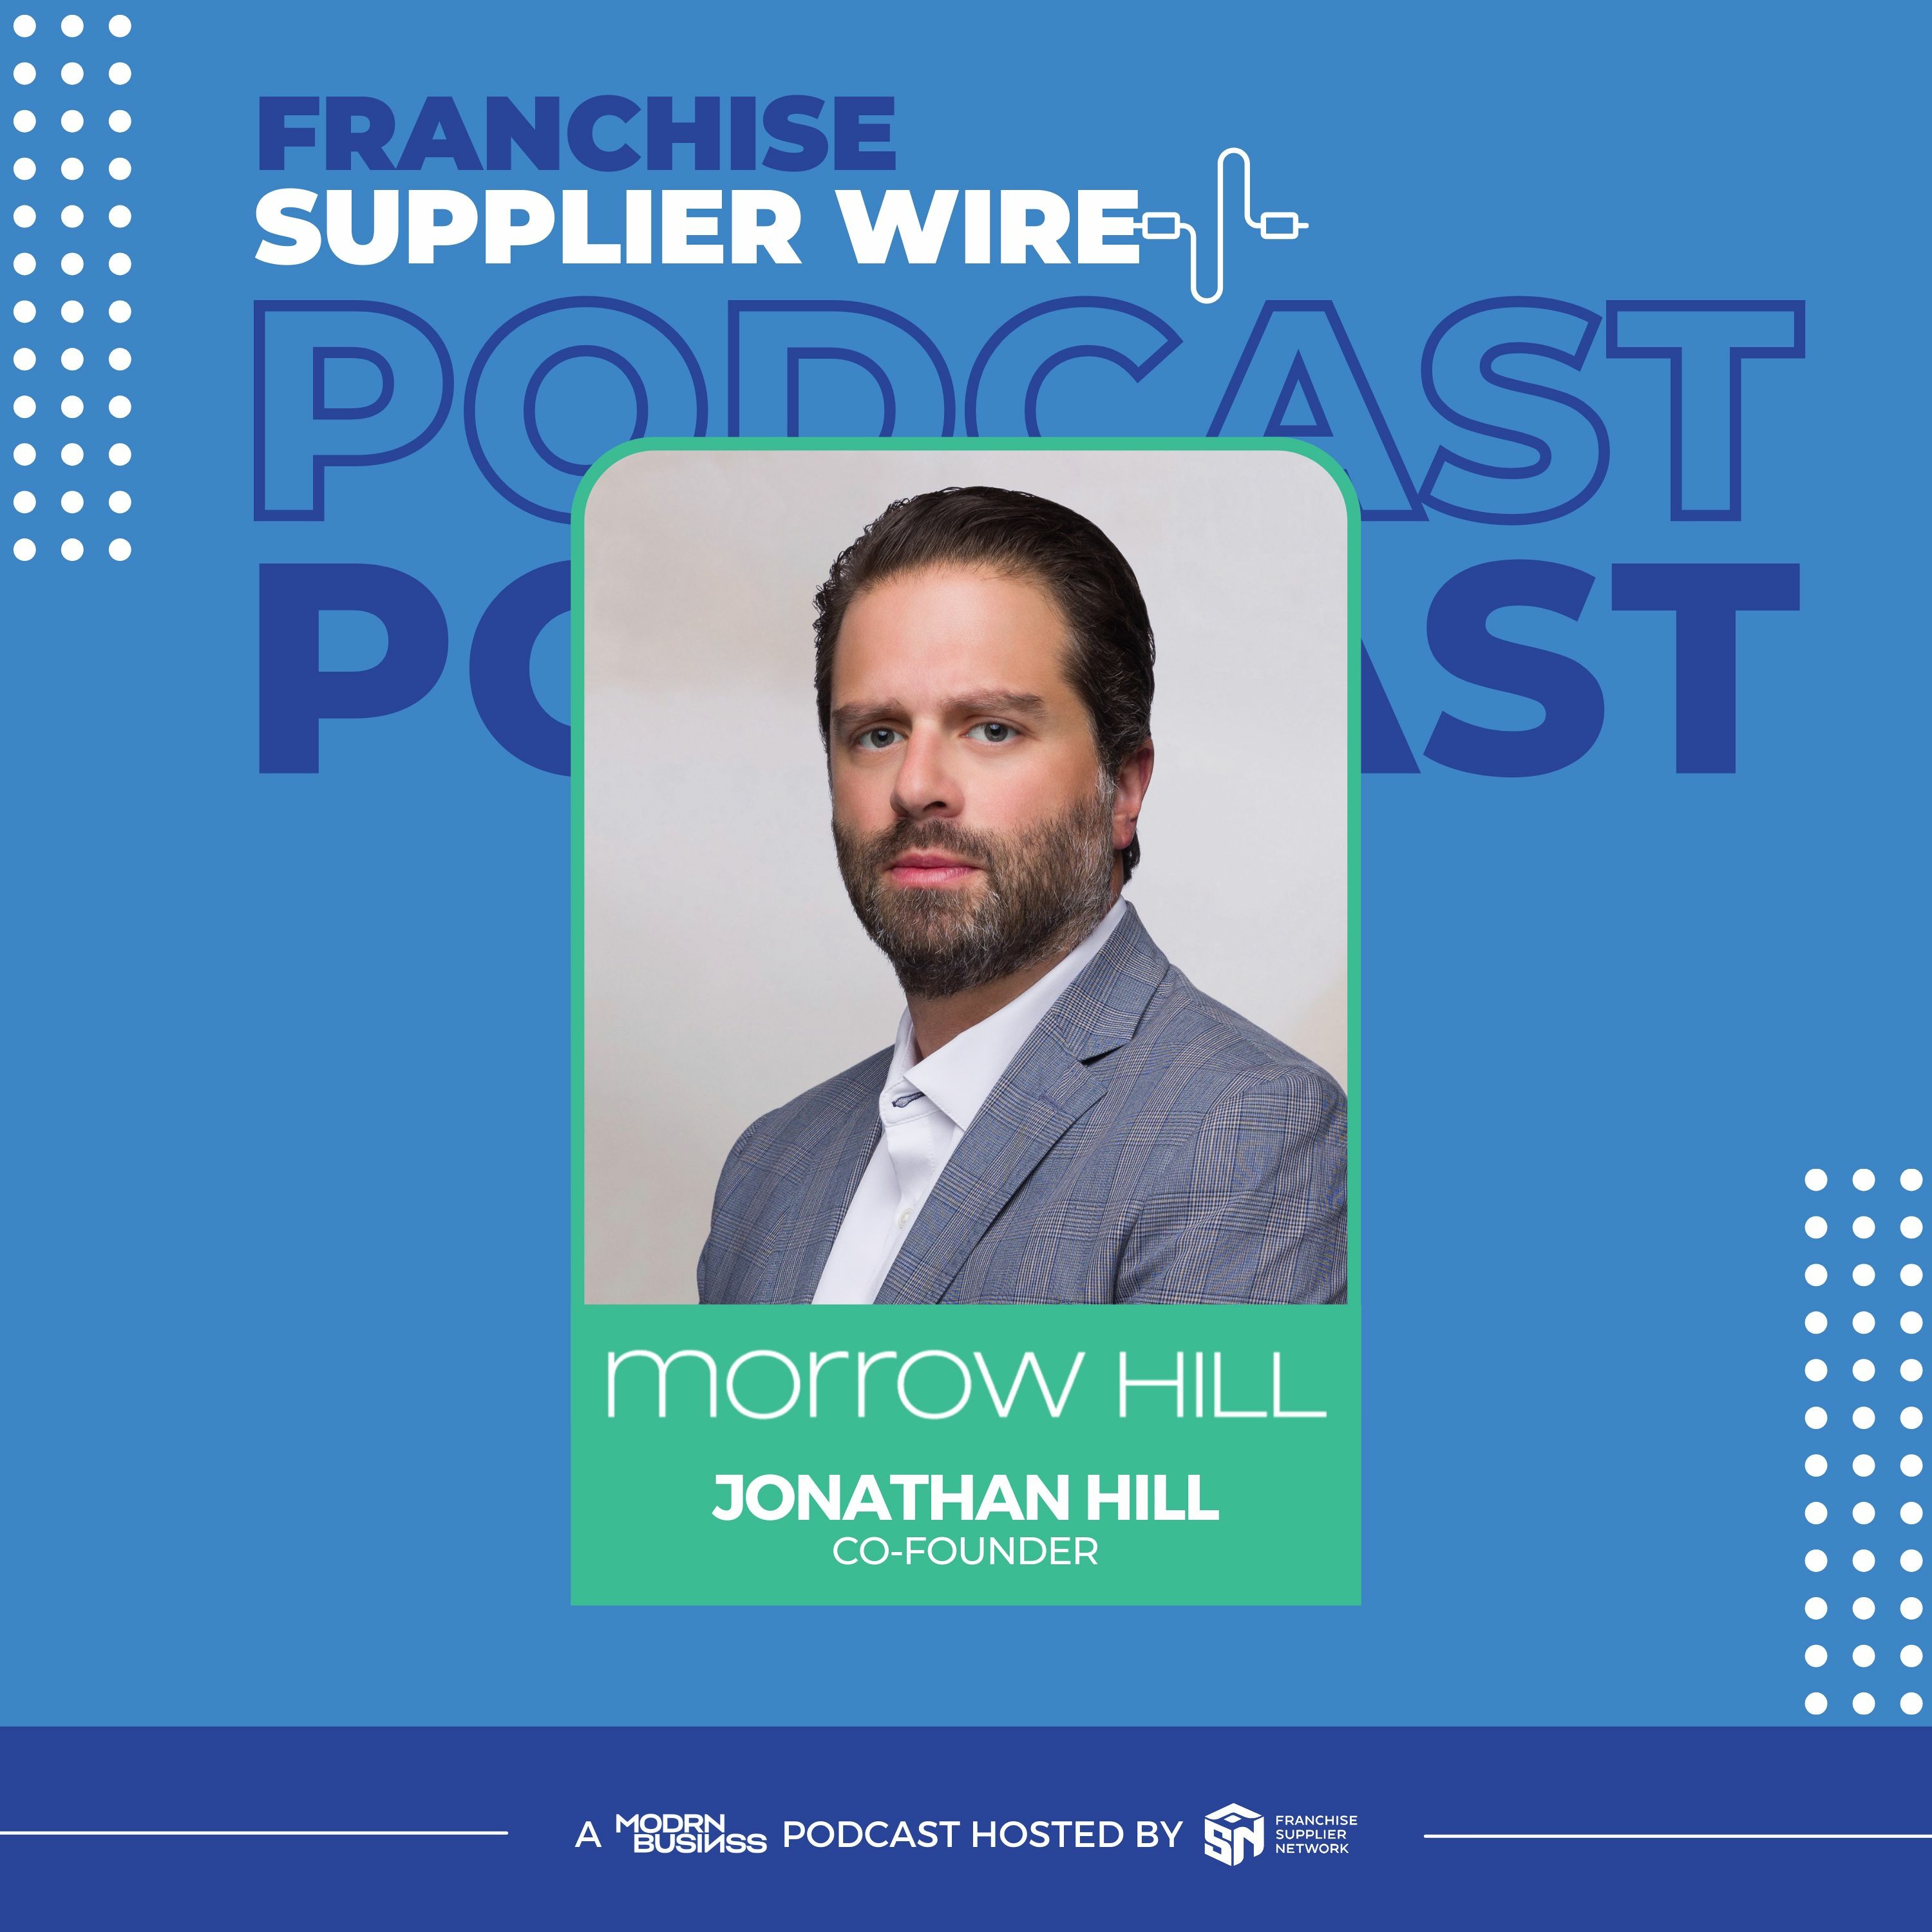 Supplier Wire 028: Real Estate & Technology with Jonathan Hill of Morrow Hill